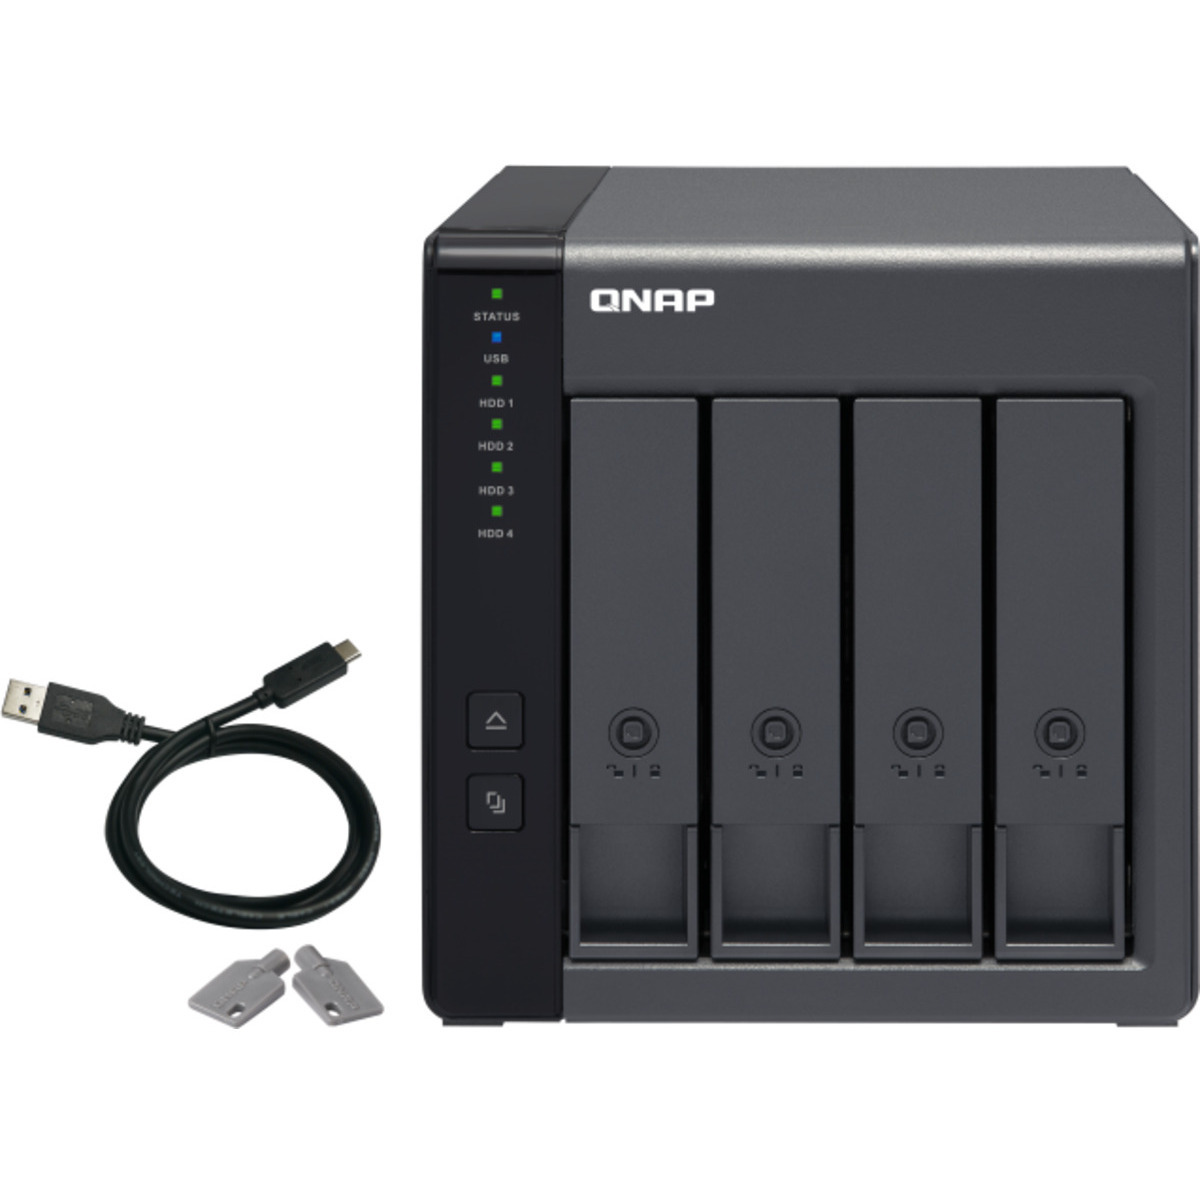 QNAP TR-004 External Expansion Drive 8tb 4-Bay Desktop Multimedia / Power User / Business Expansion Enclosure 4x2tb Samsung 870 QVO MZ-77Q2T0 2.5 560/530MB/s SATA 6Gb/s SSD CONSUMER Class Drives Installed - Burn-In Tested TR-004 External Expansion Drive